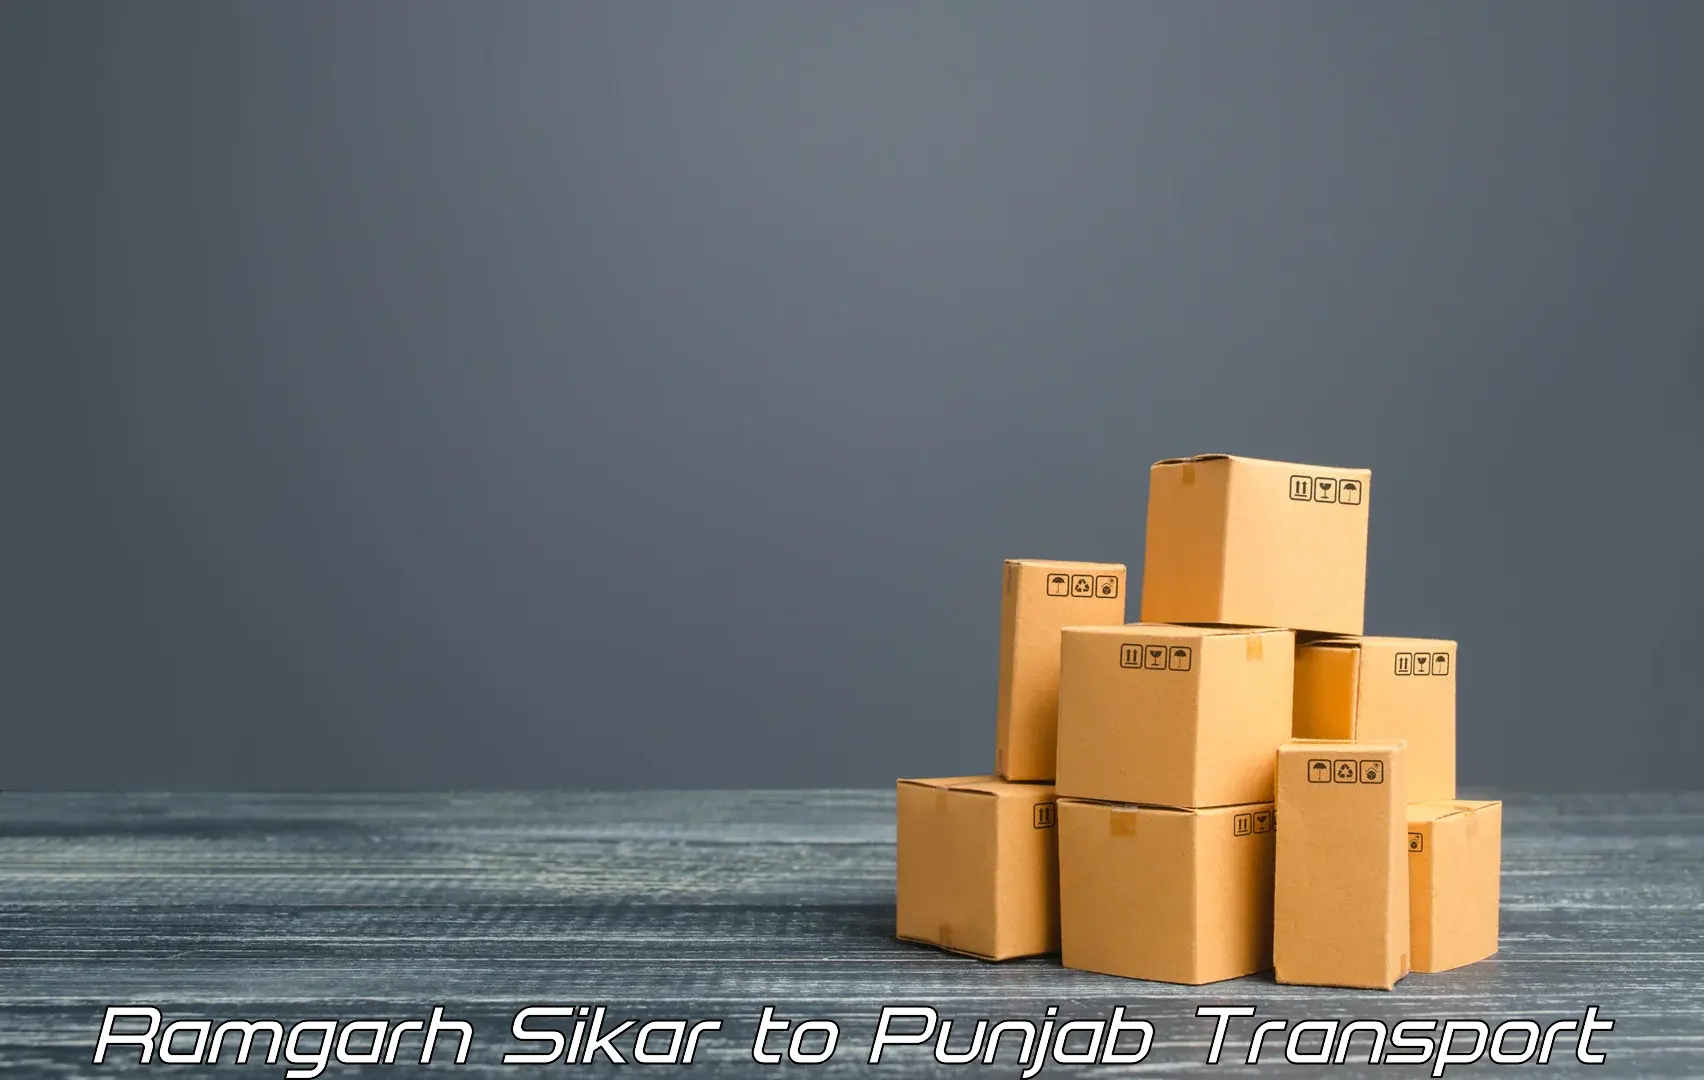 Container transport service Ramgarh Sikar to Fazilka